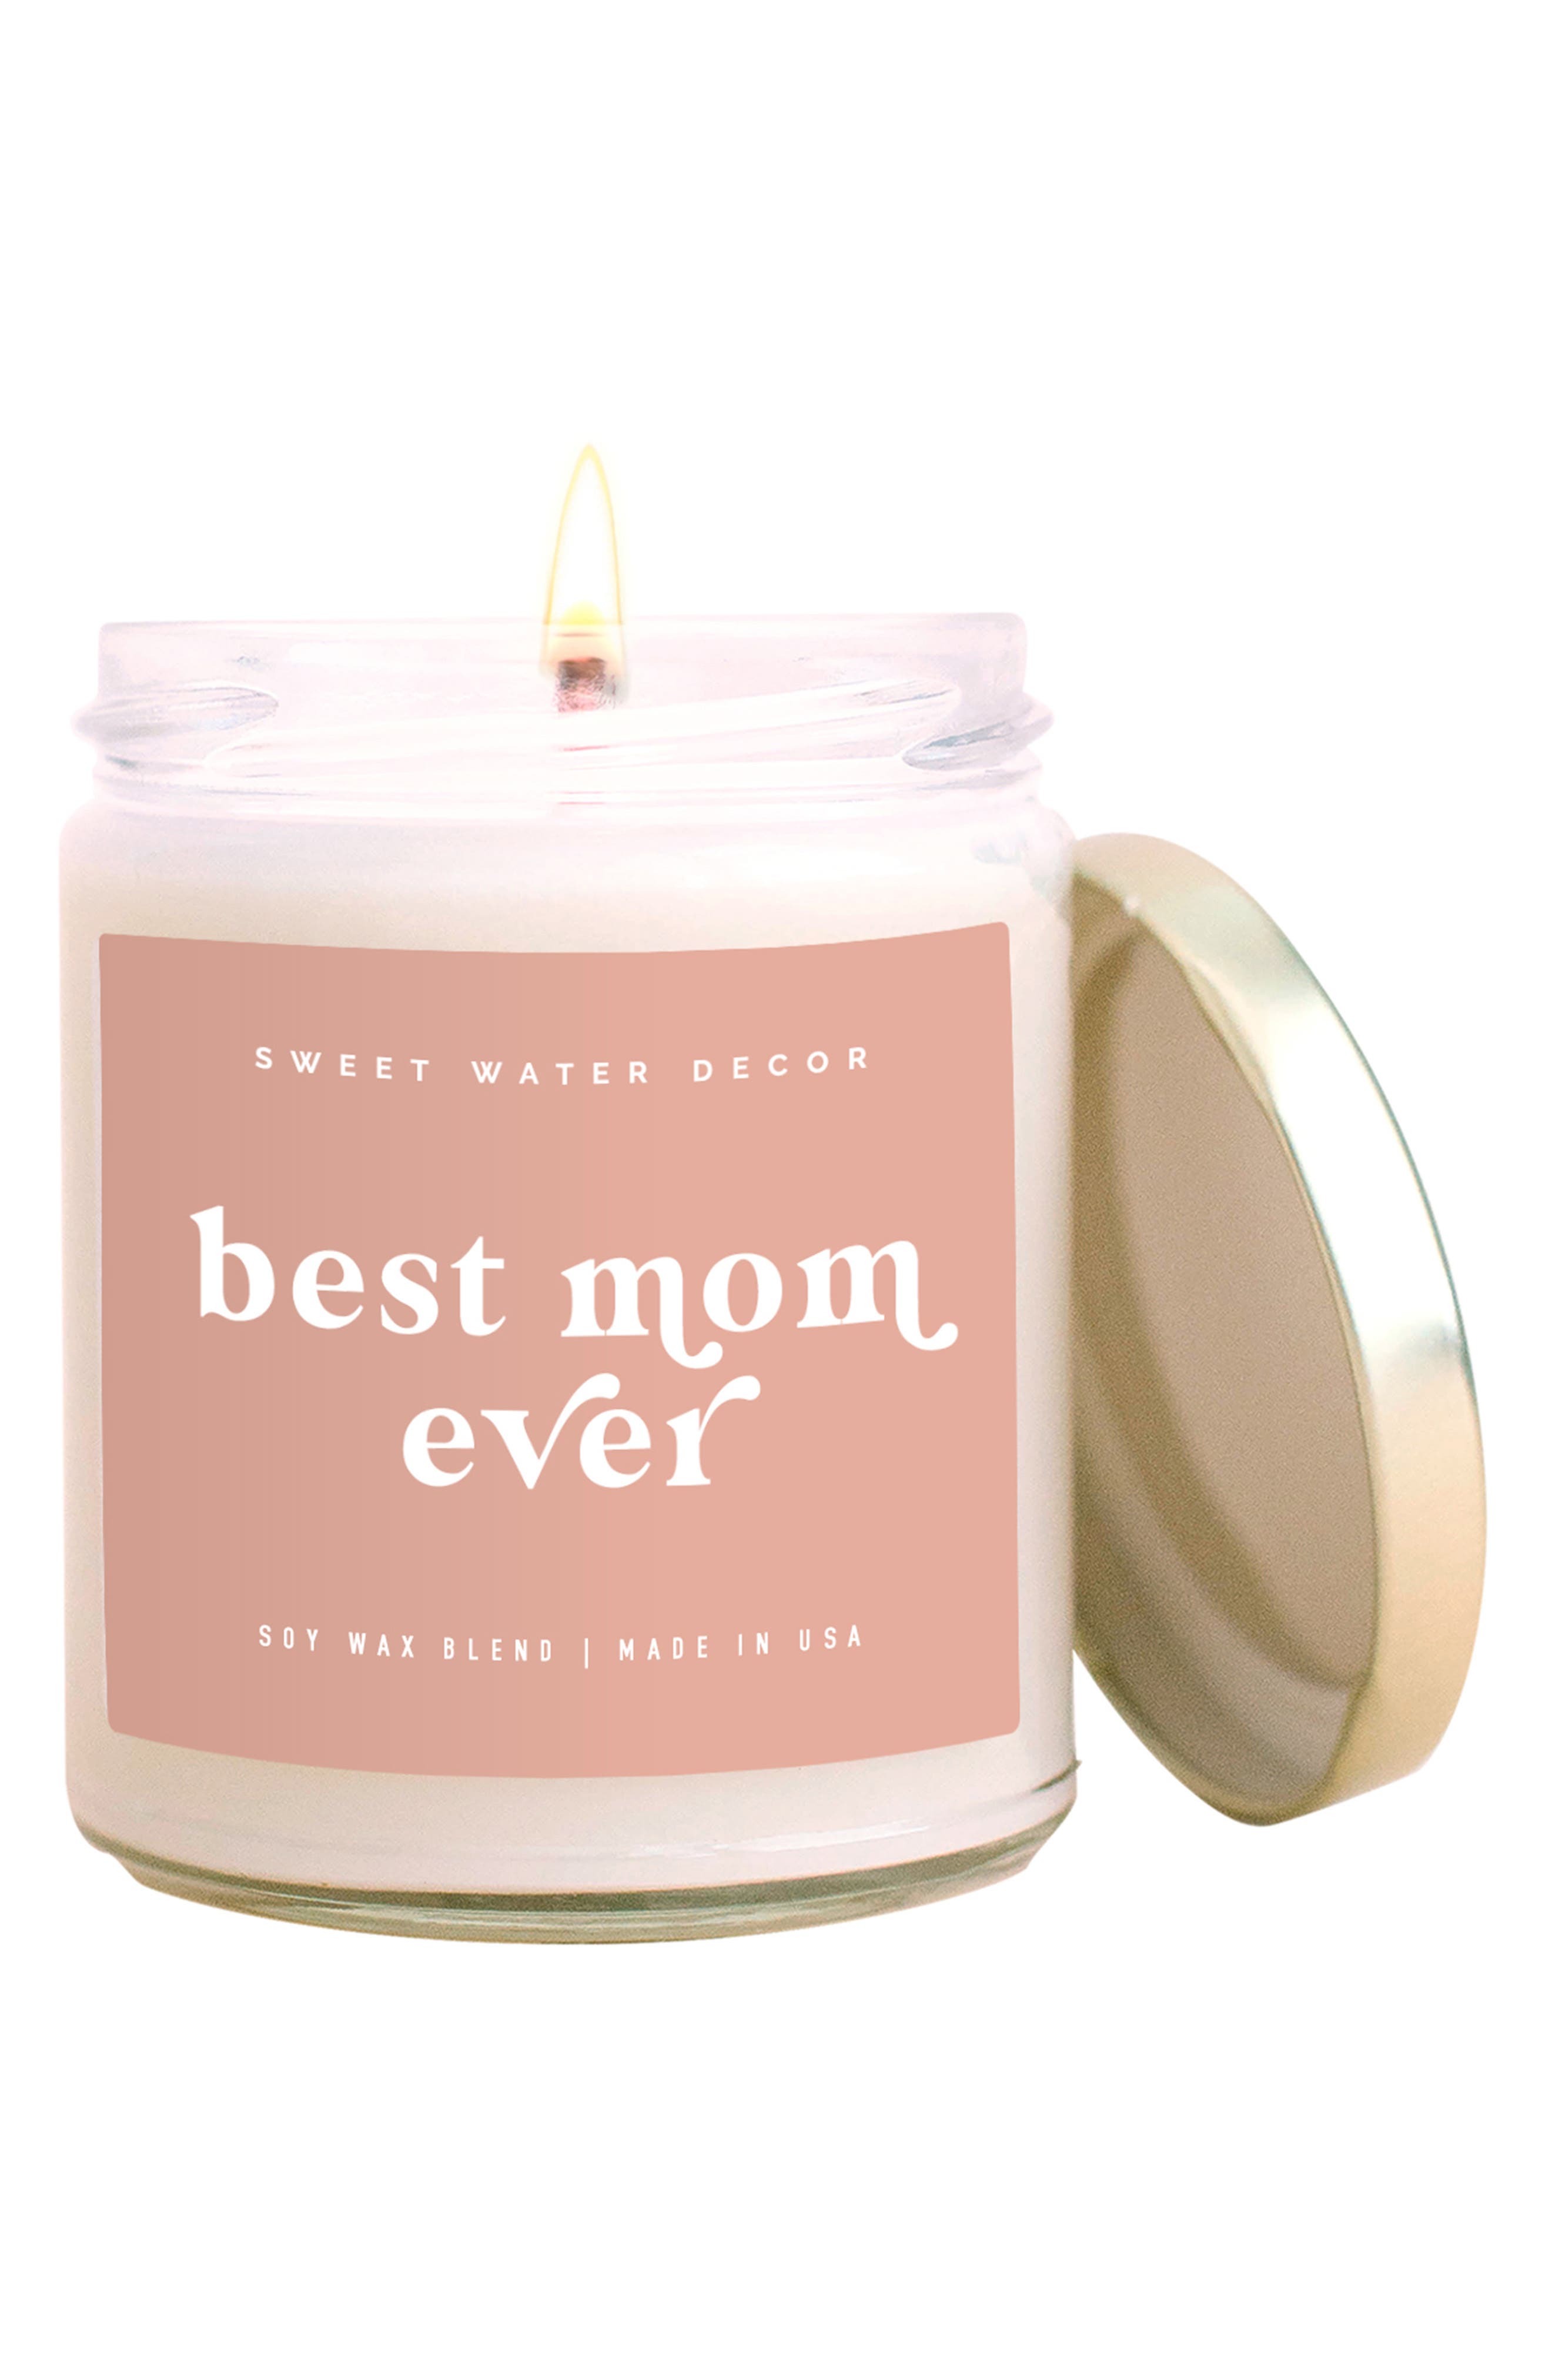 Best Mom Ever Blush Candle - Set of 2 SWEET WATER DECOR